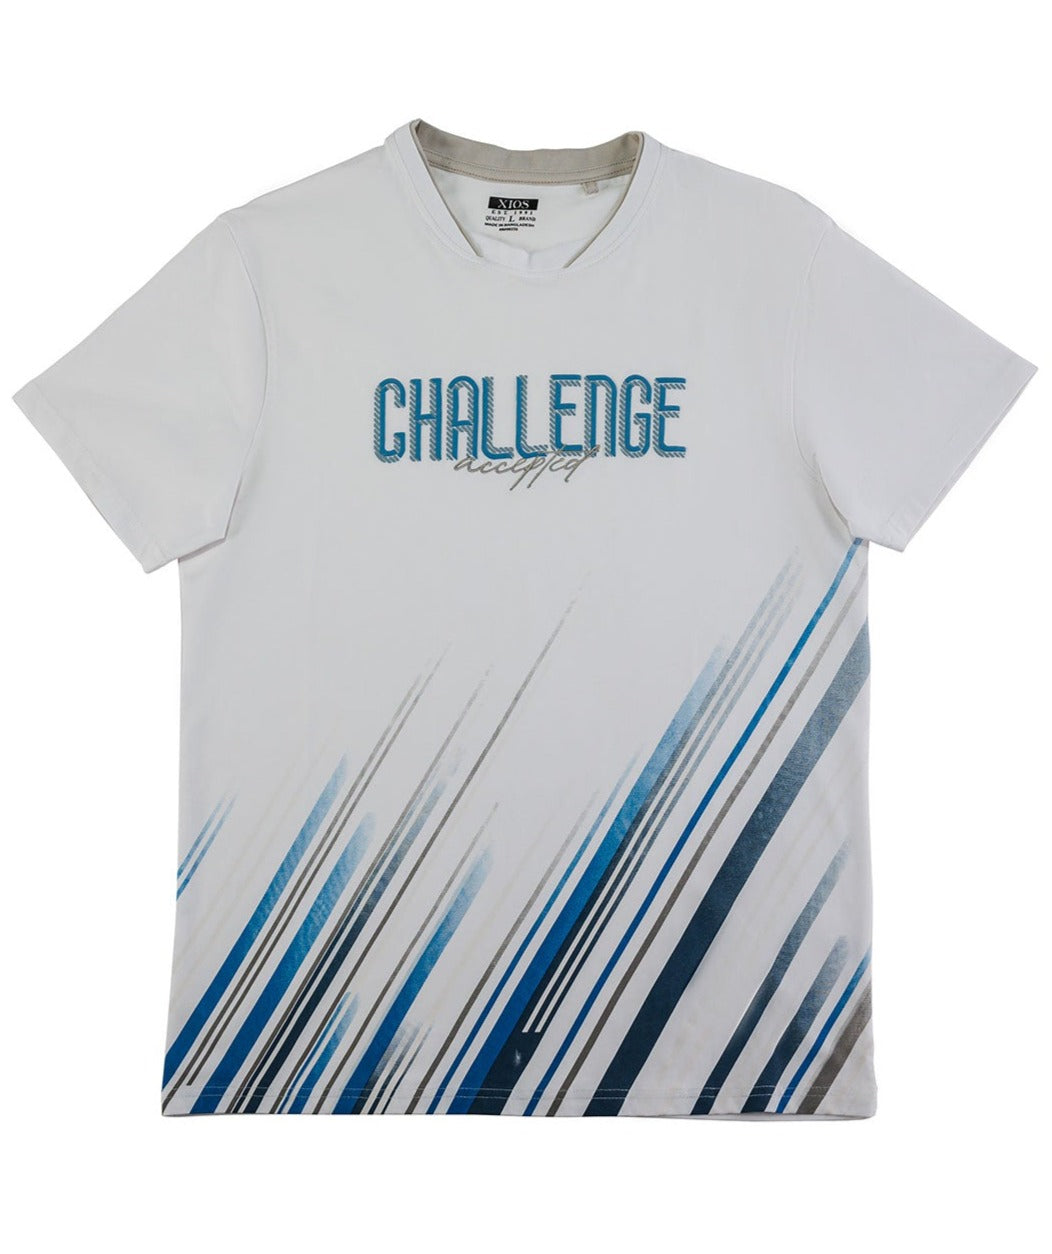 "Challenge Accepted" Graphic Tee